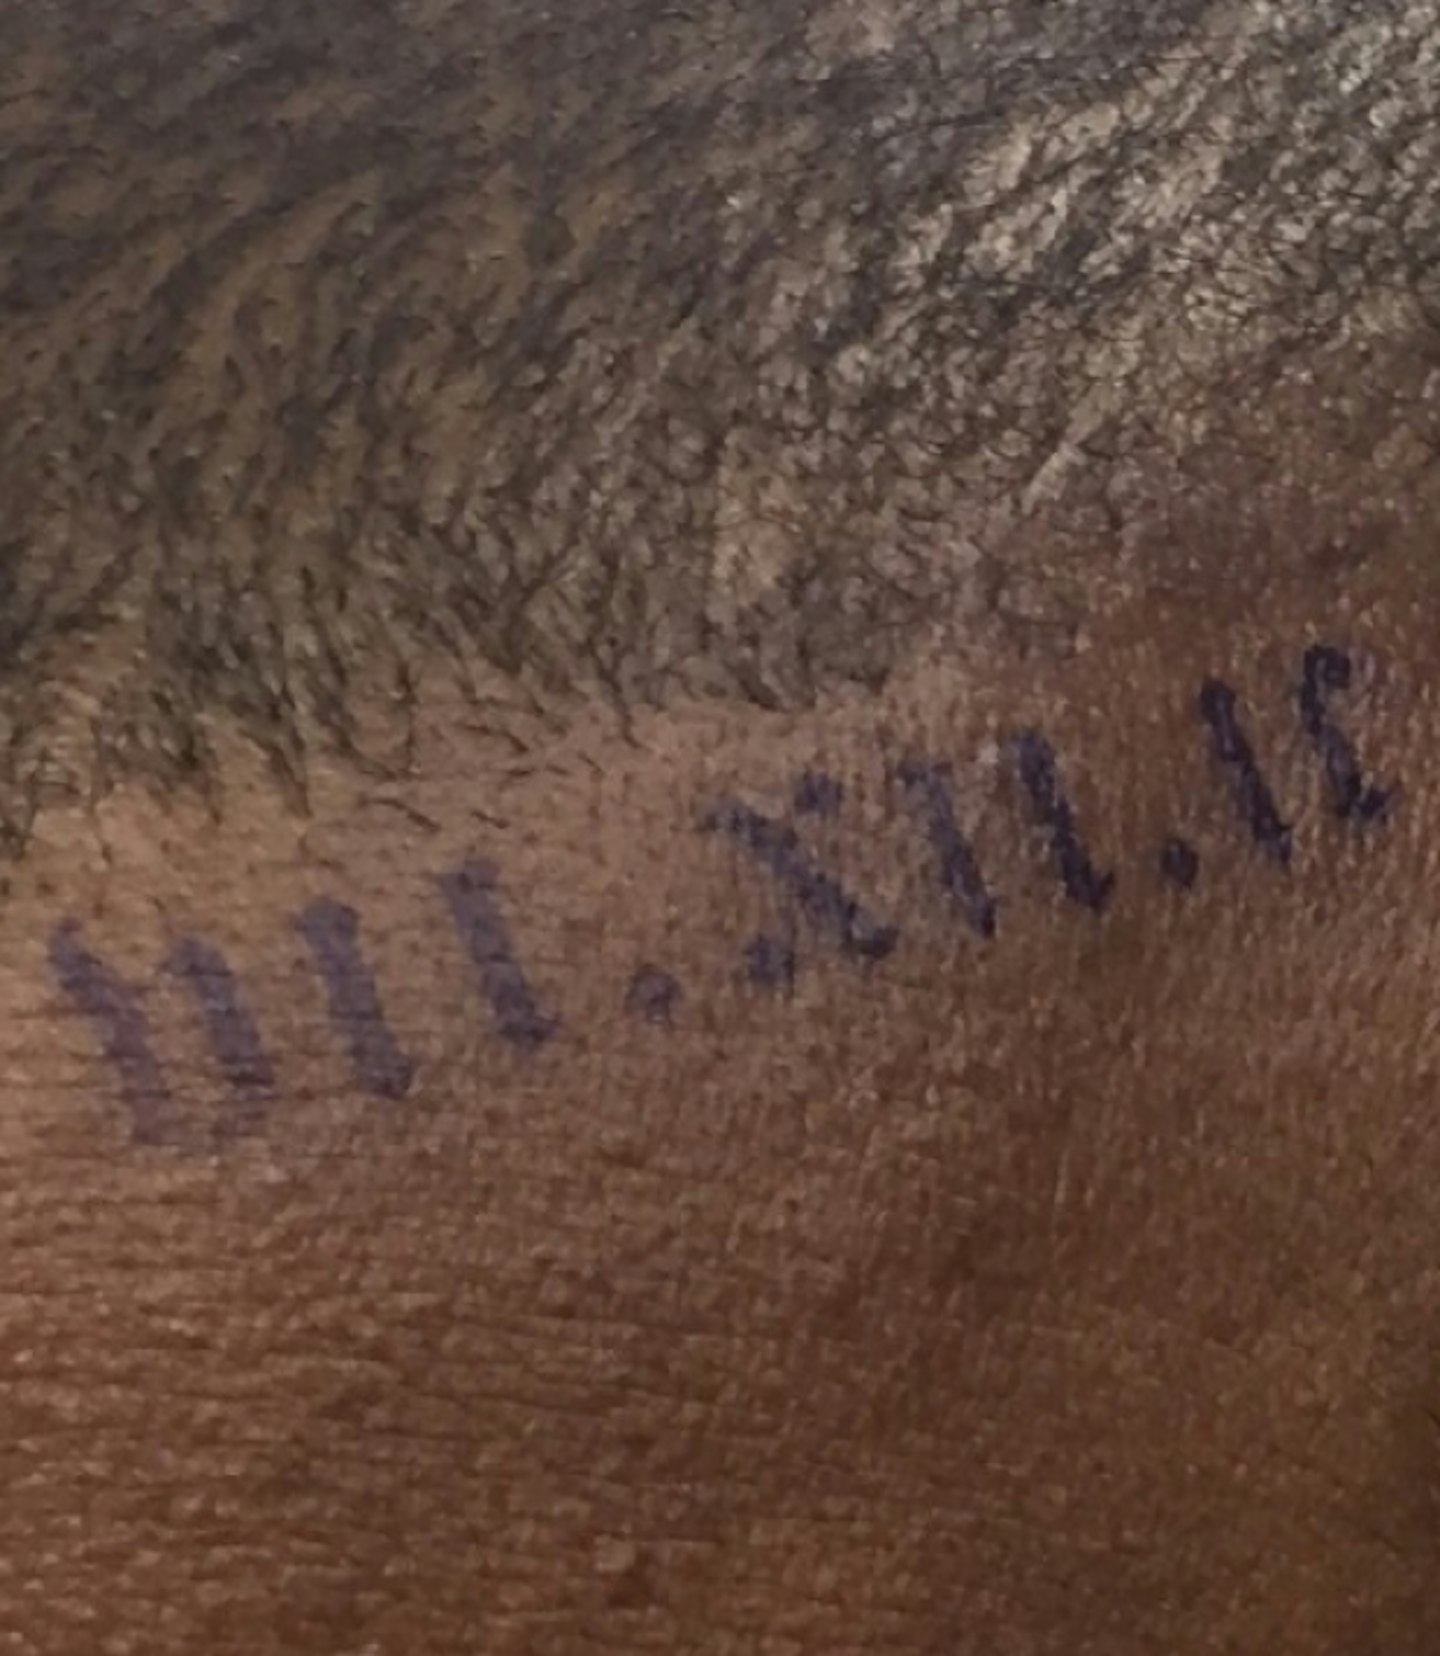 Kanye's alternative to a face tattoo